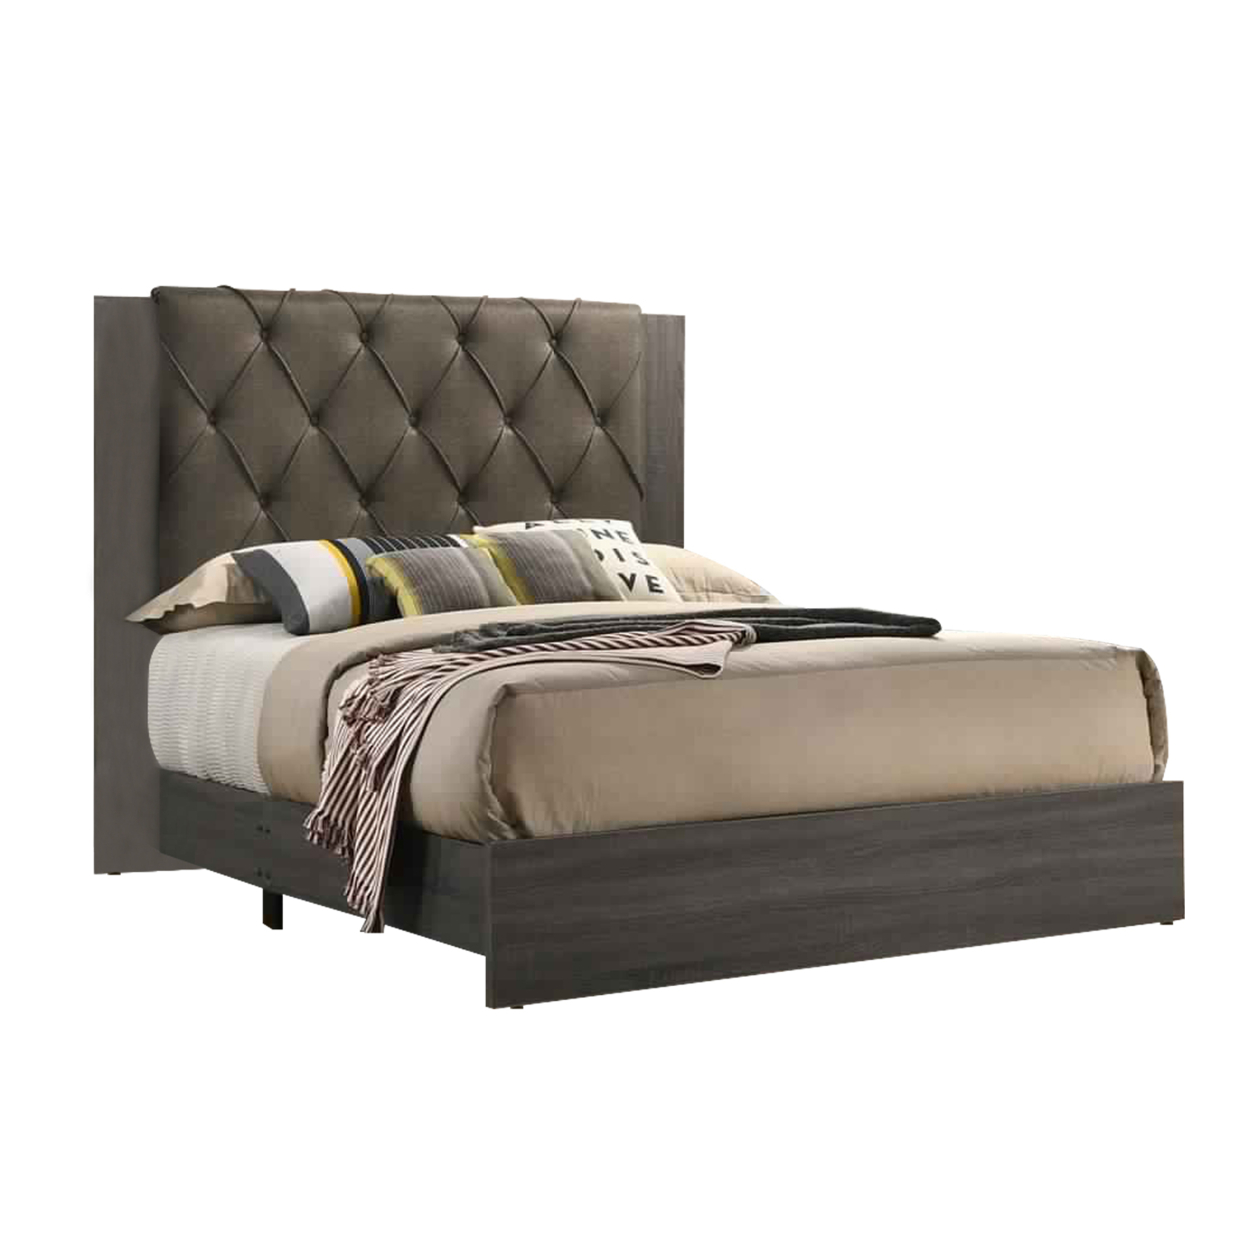 Wooden Queen Bed With Button Tufted Fabric Headboard, Gray And Brown- Saltoro Sherpi